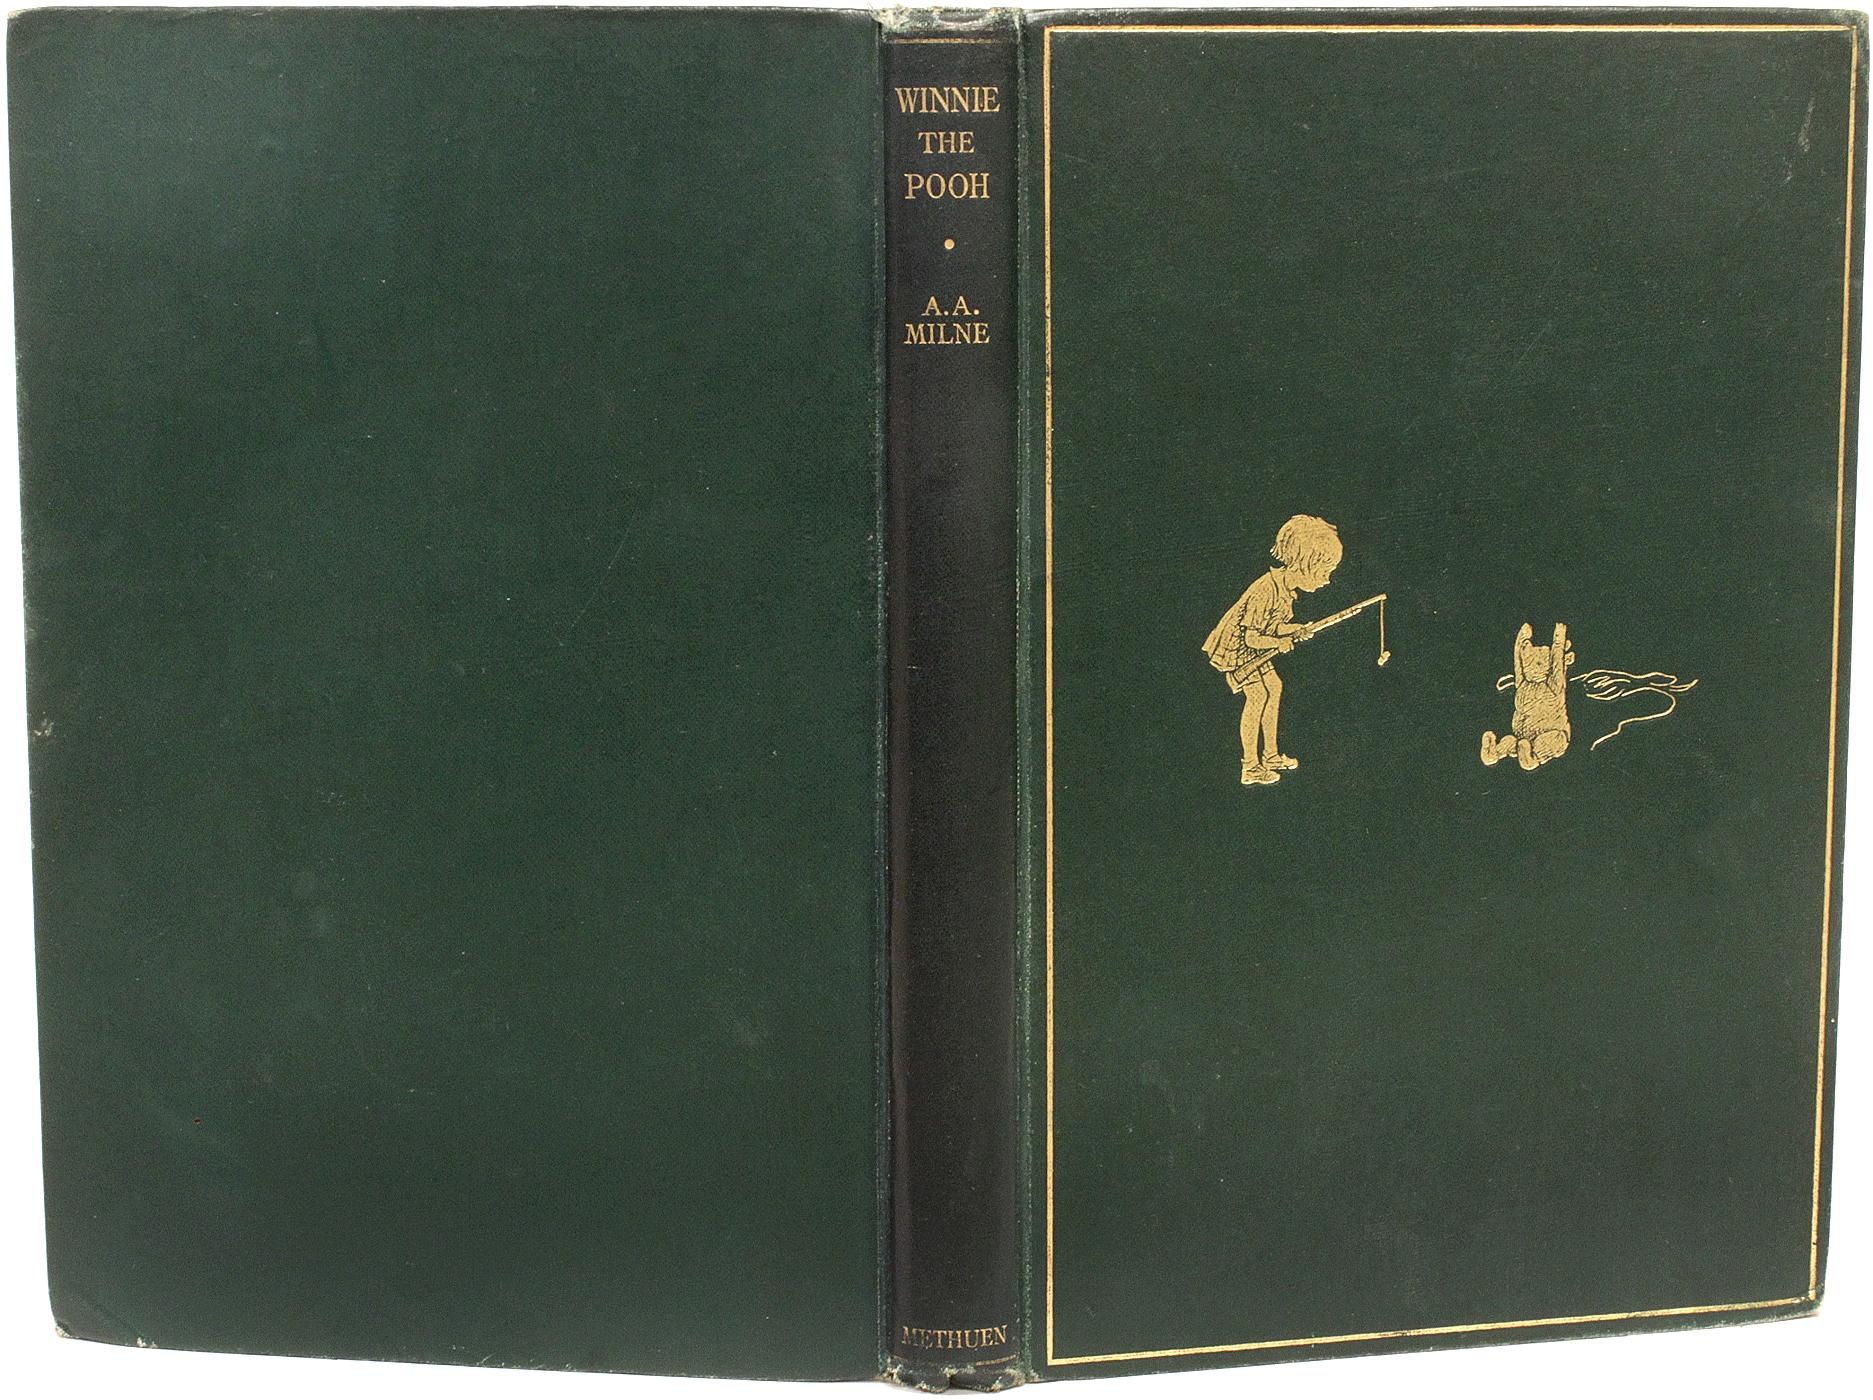 AUTHOR: MILNE, A. A.

TITLE: Winnie The Pooh.

PUBLISHER: London: Methuen & Co. Ltd., 1926.

DESCRIPTION: FIRST EDITION FIRST PRINTING.  1 volume, illustrated by E. H. Shephard.  Bound in the publisher's original gilt stamped green cloth, top edge